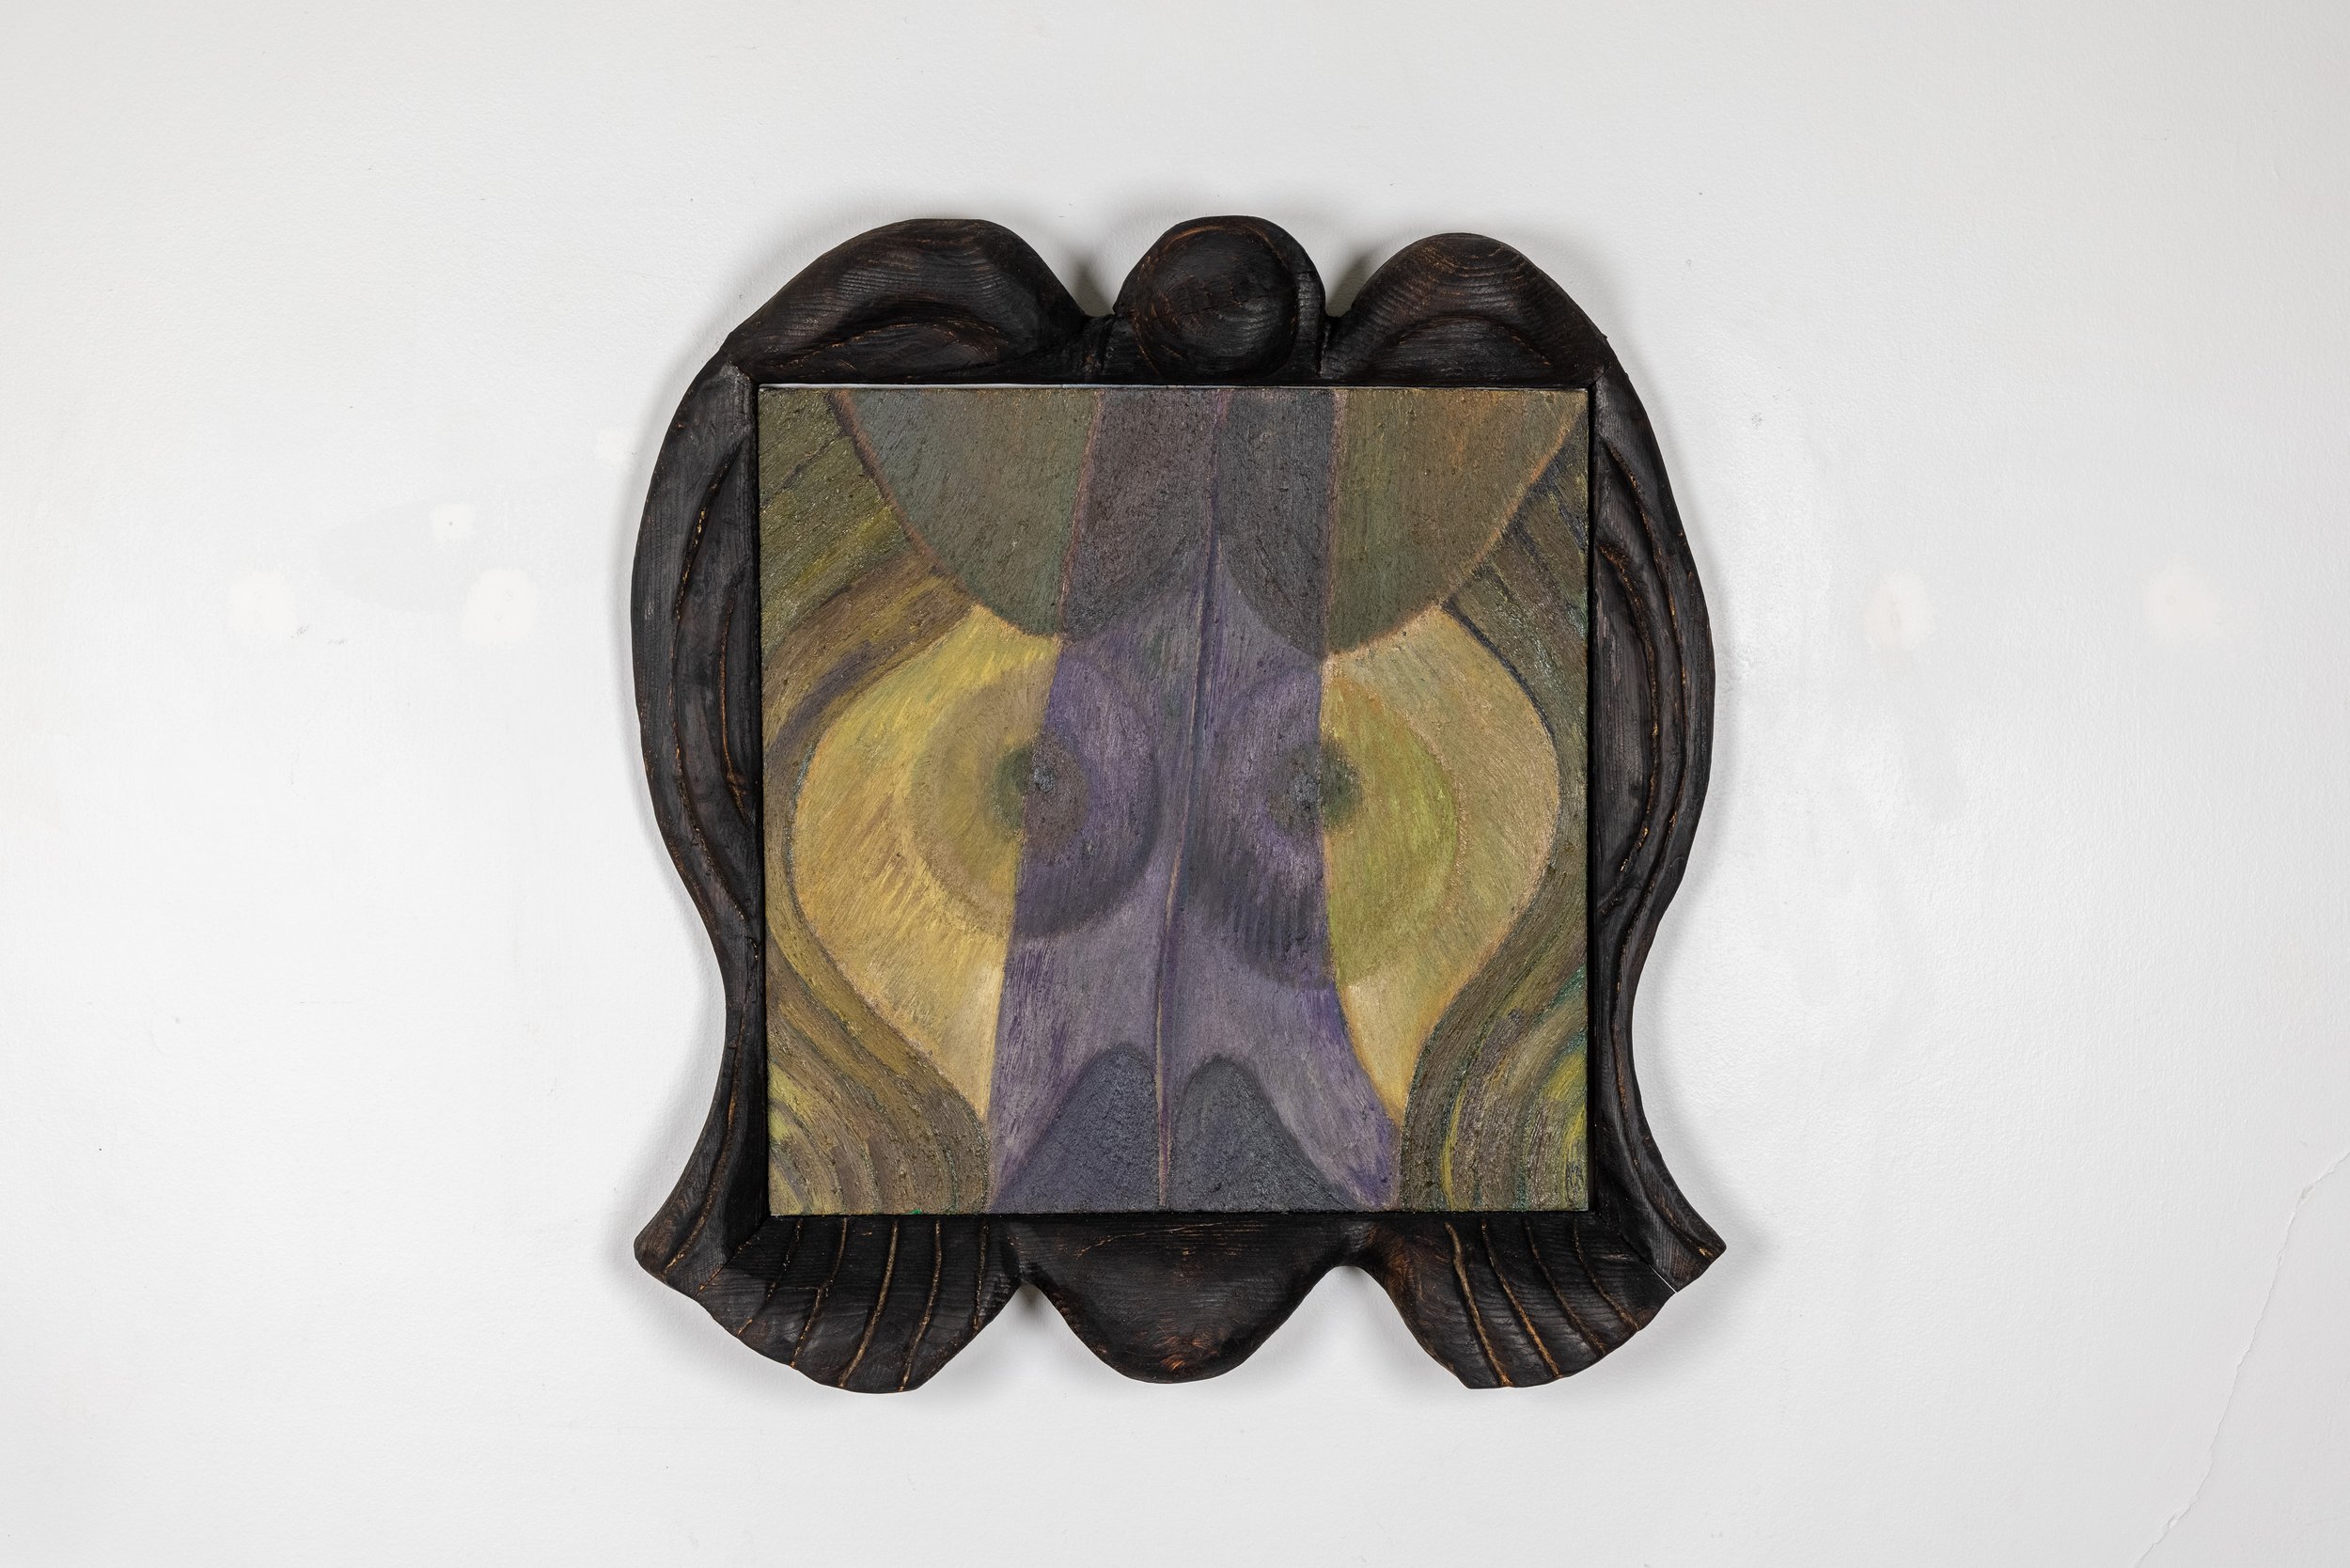 Siren, 2021, oil on canvas in charred custom wood frame, 29 x 27 x 4 inches